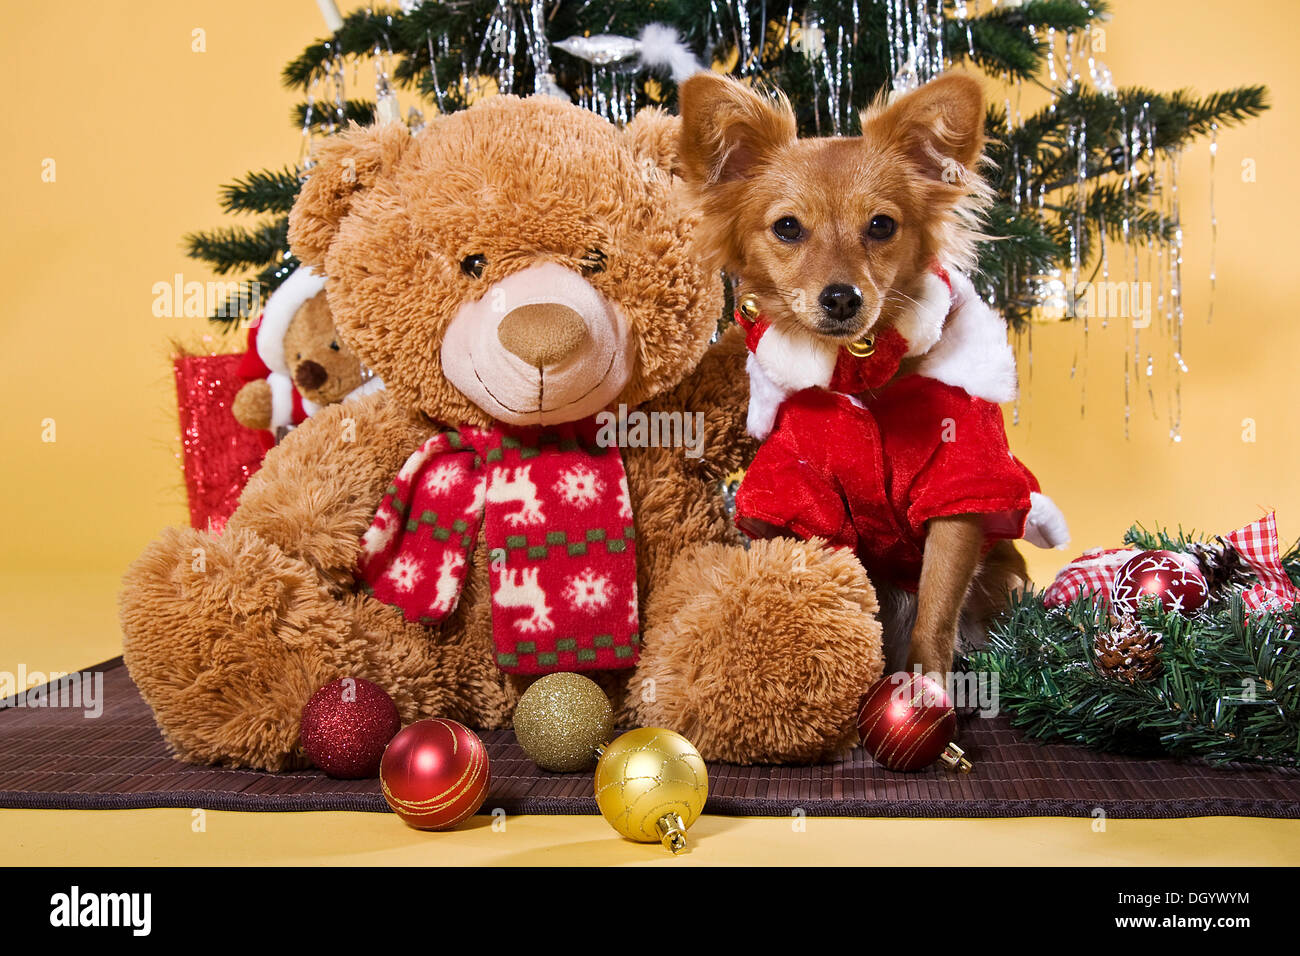 Half-breed dog wearing a Christmas costume sitting next to a Teddy bear Stock Photo